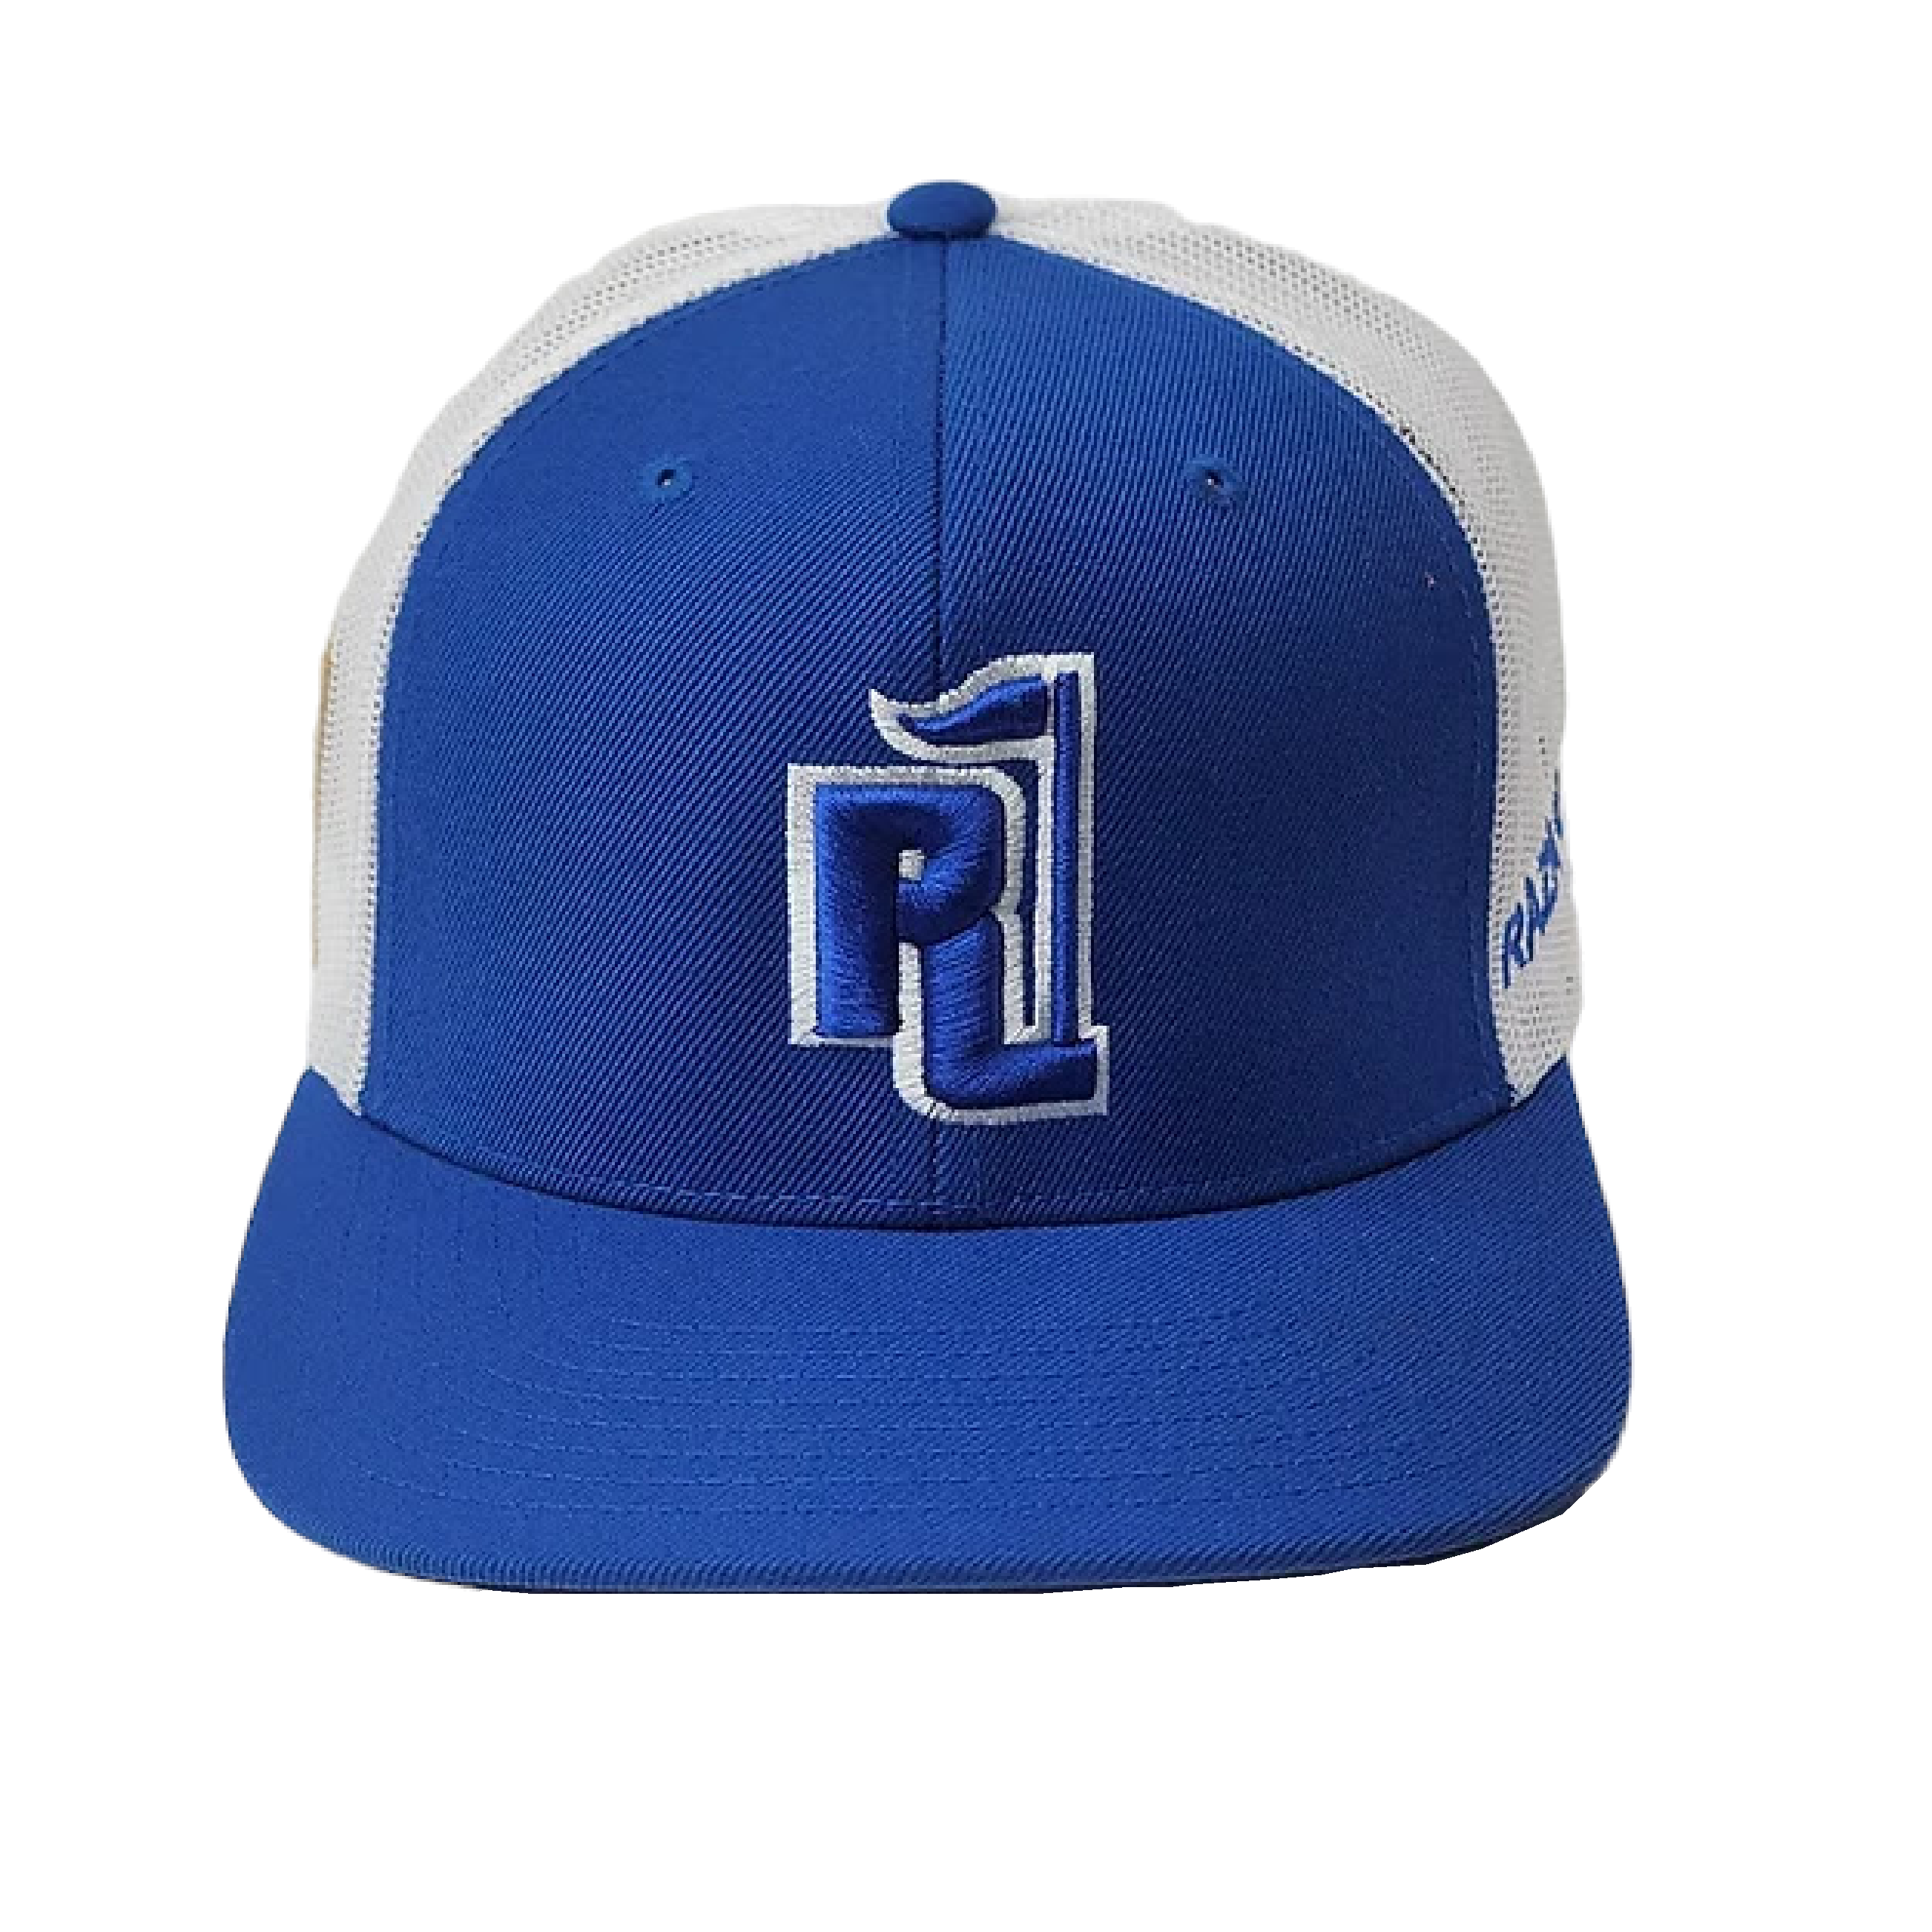 Raza Golf royal blue and white Trucker with El Salvador Flag Patch